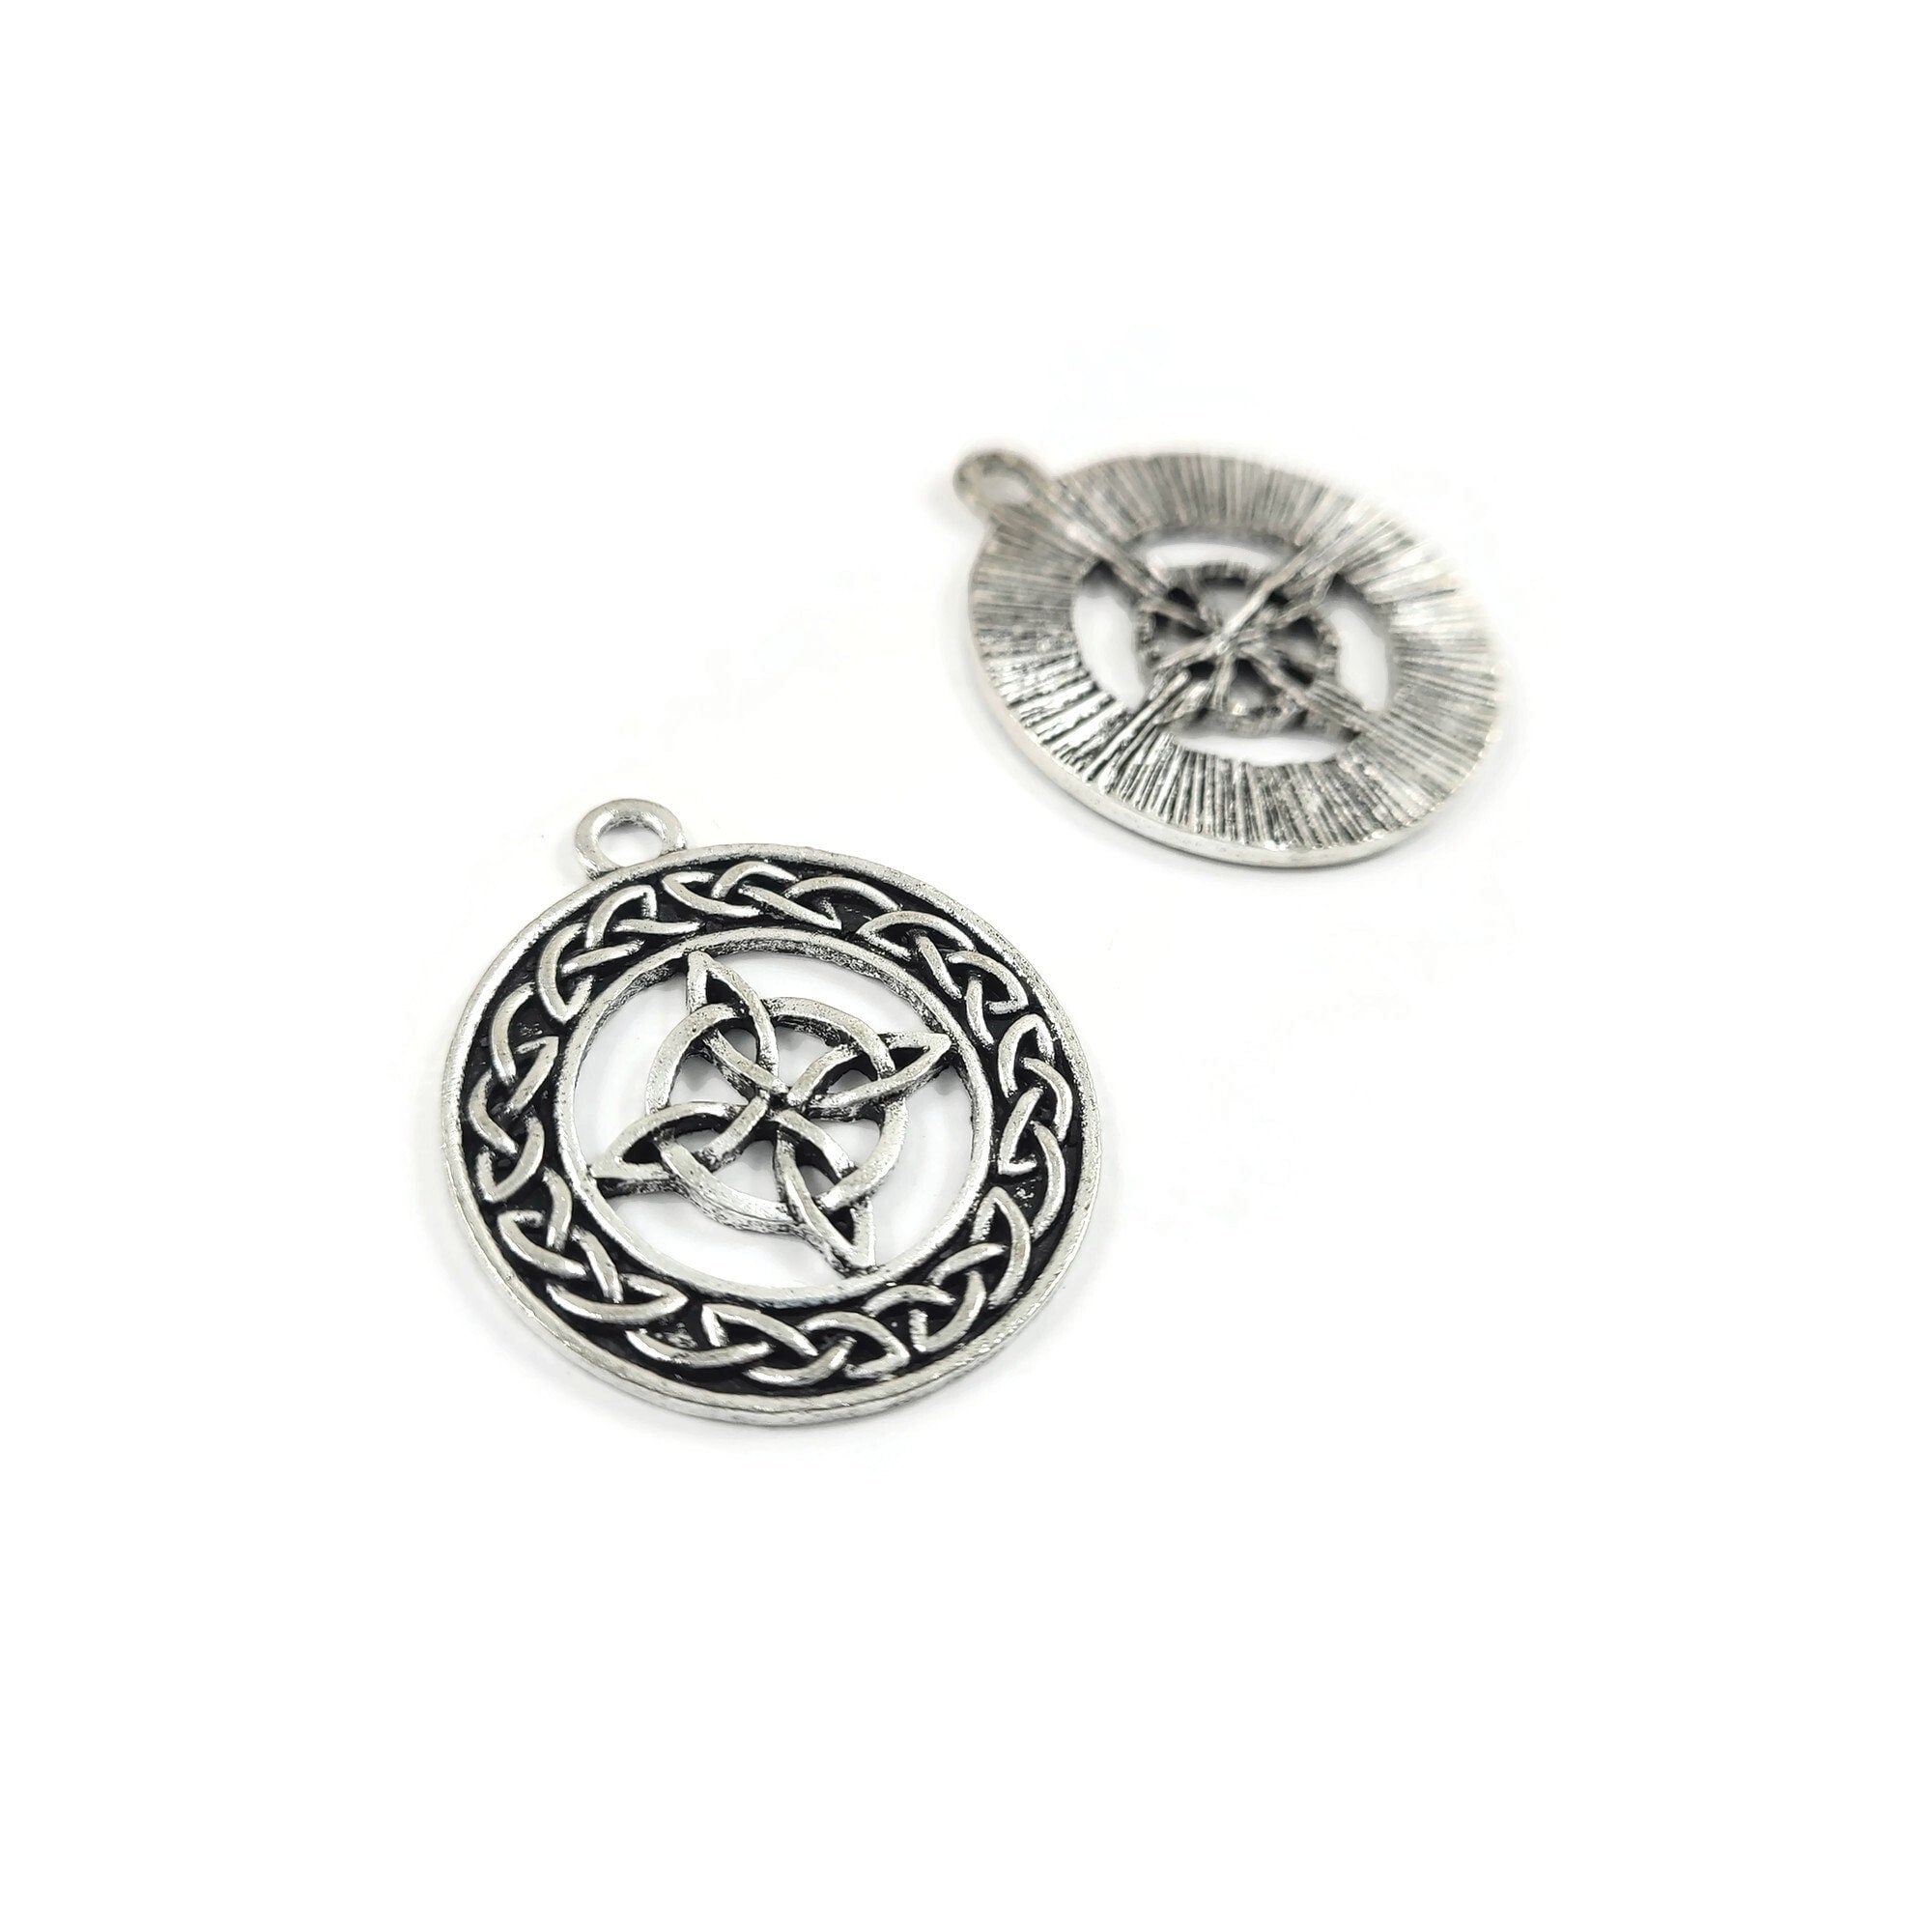 5 celtic knot charms, 30mm antique silver metal pendants, Jewelry making supplies